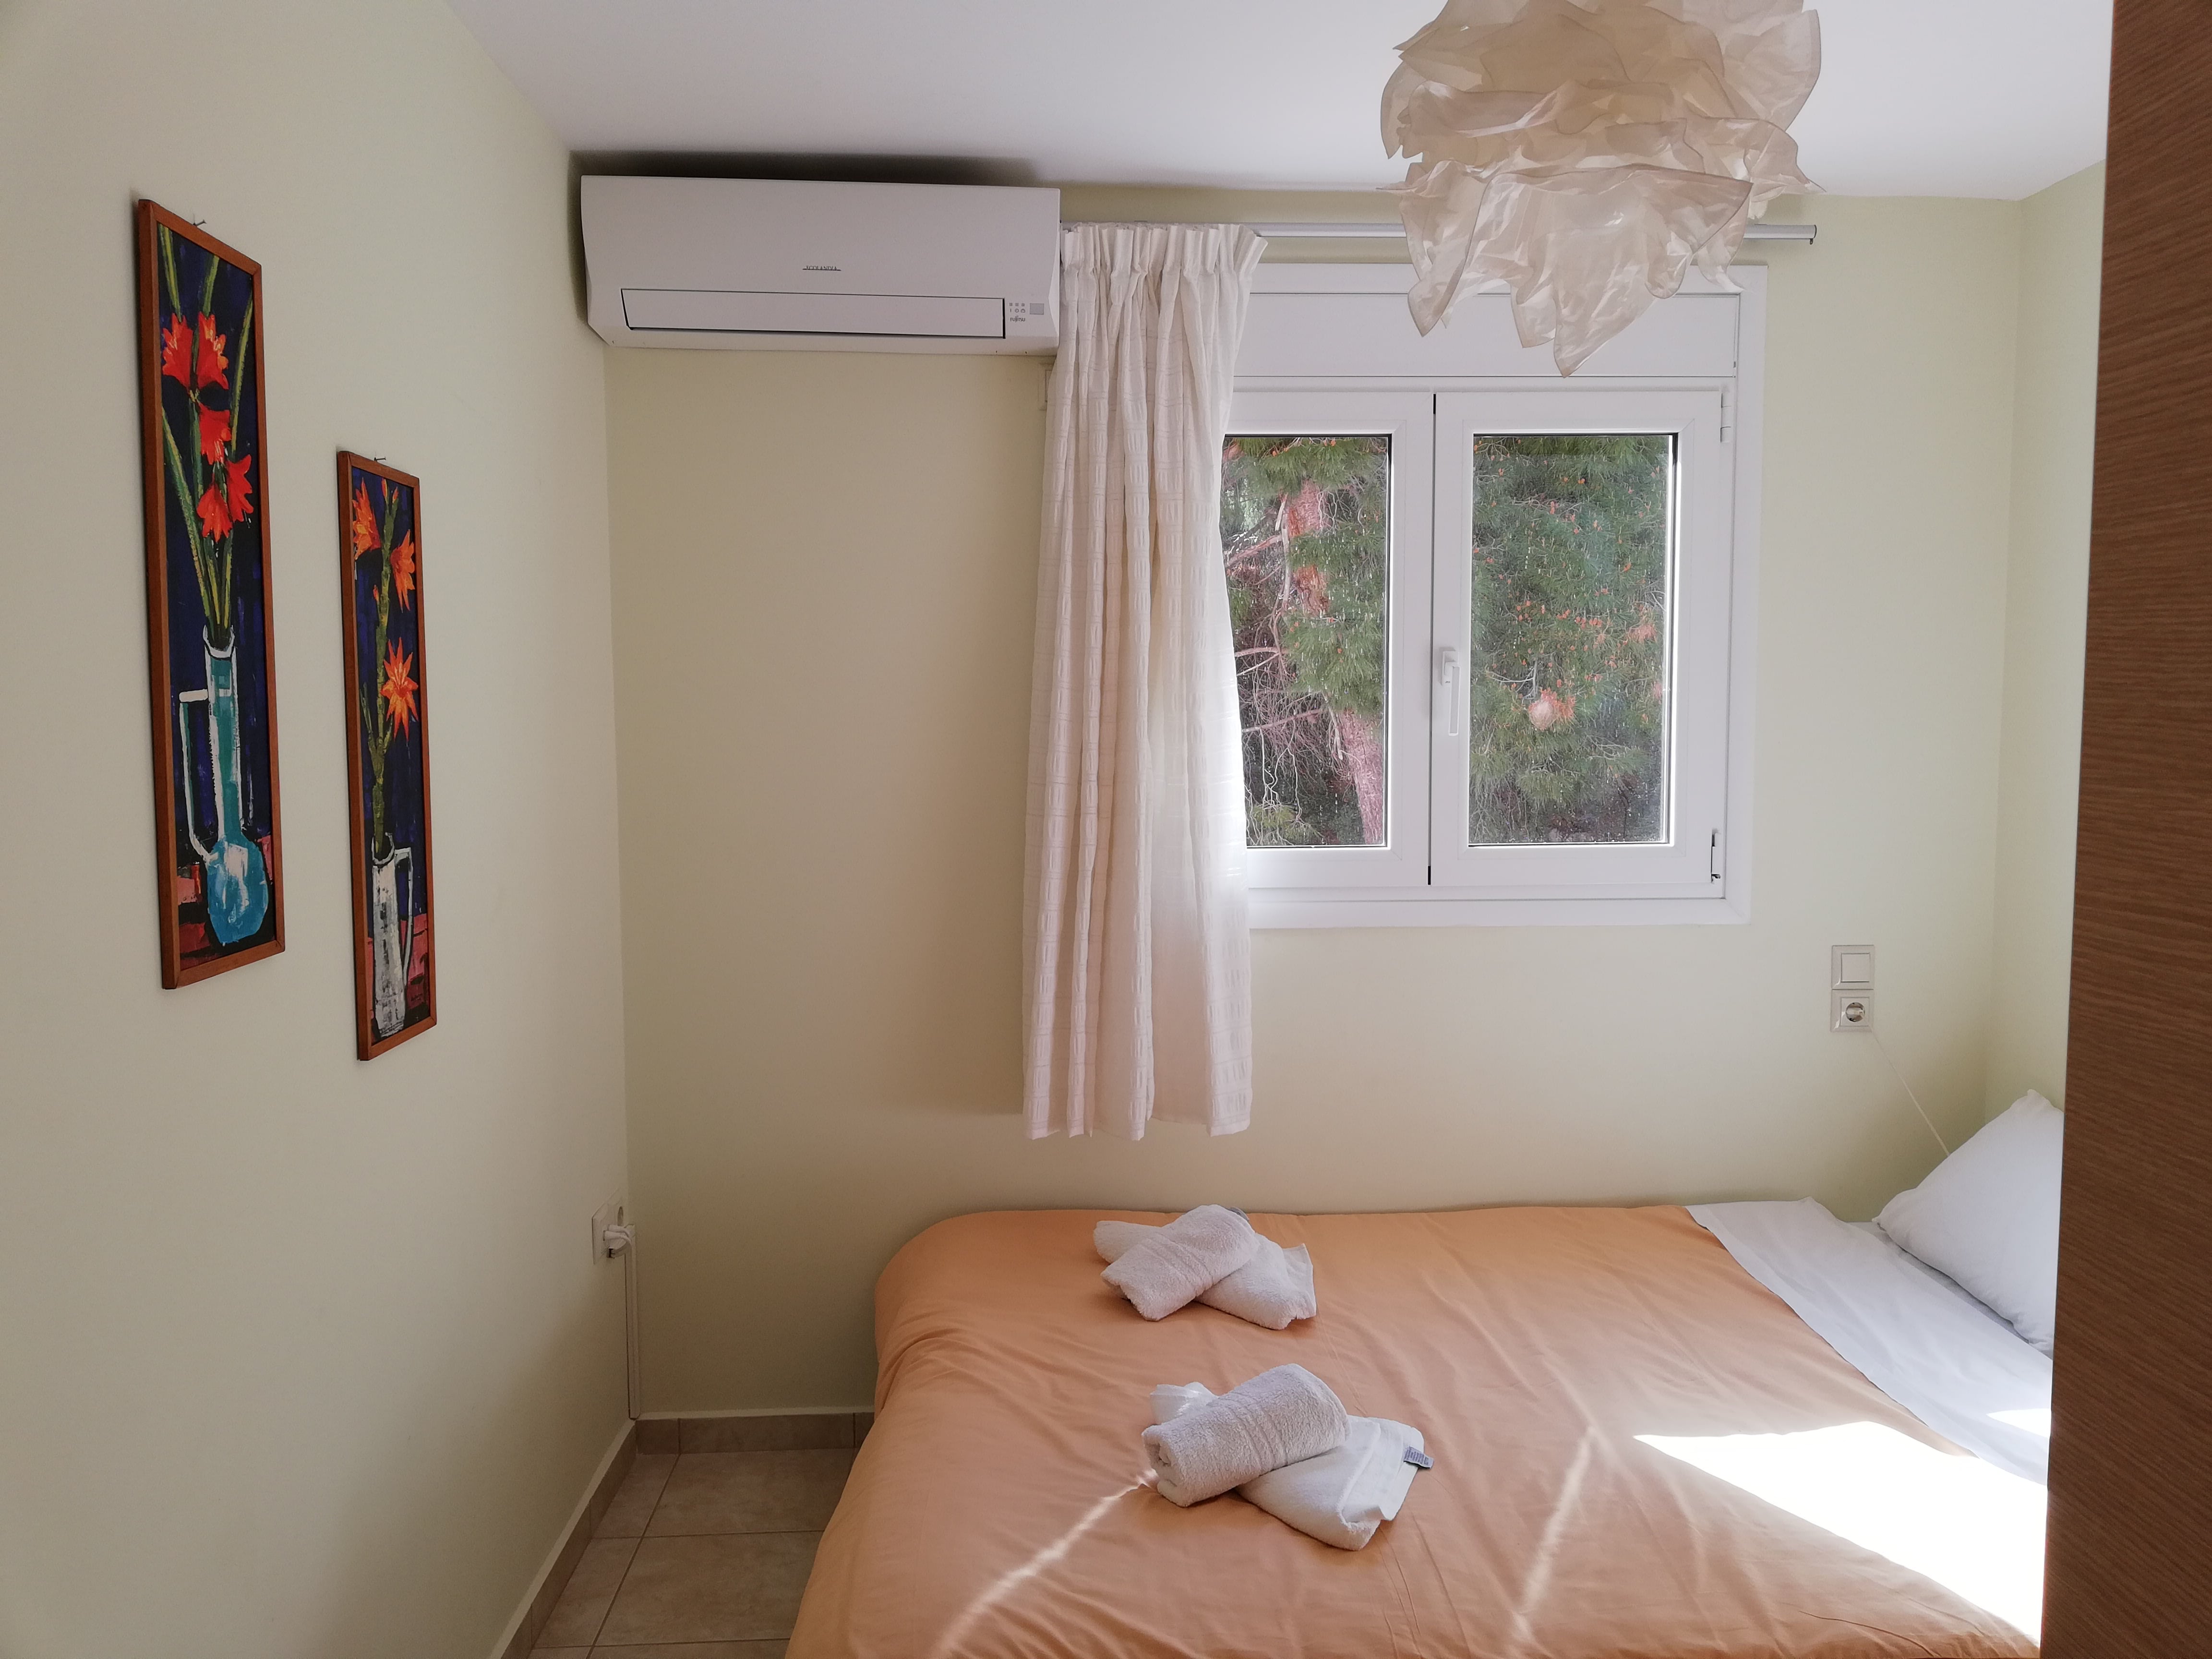 Air-conditioned Bedroom.